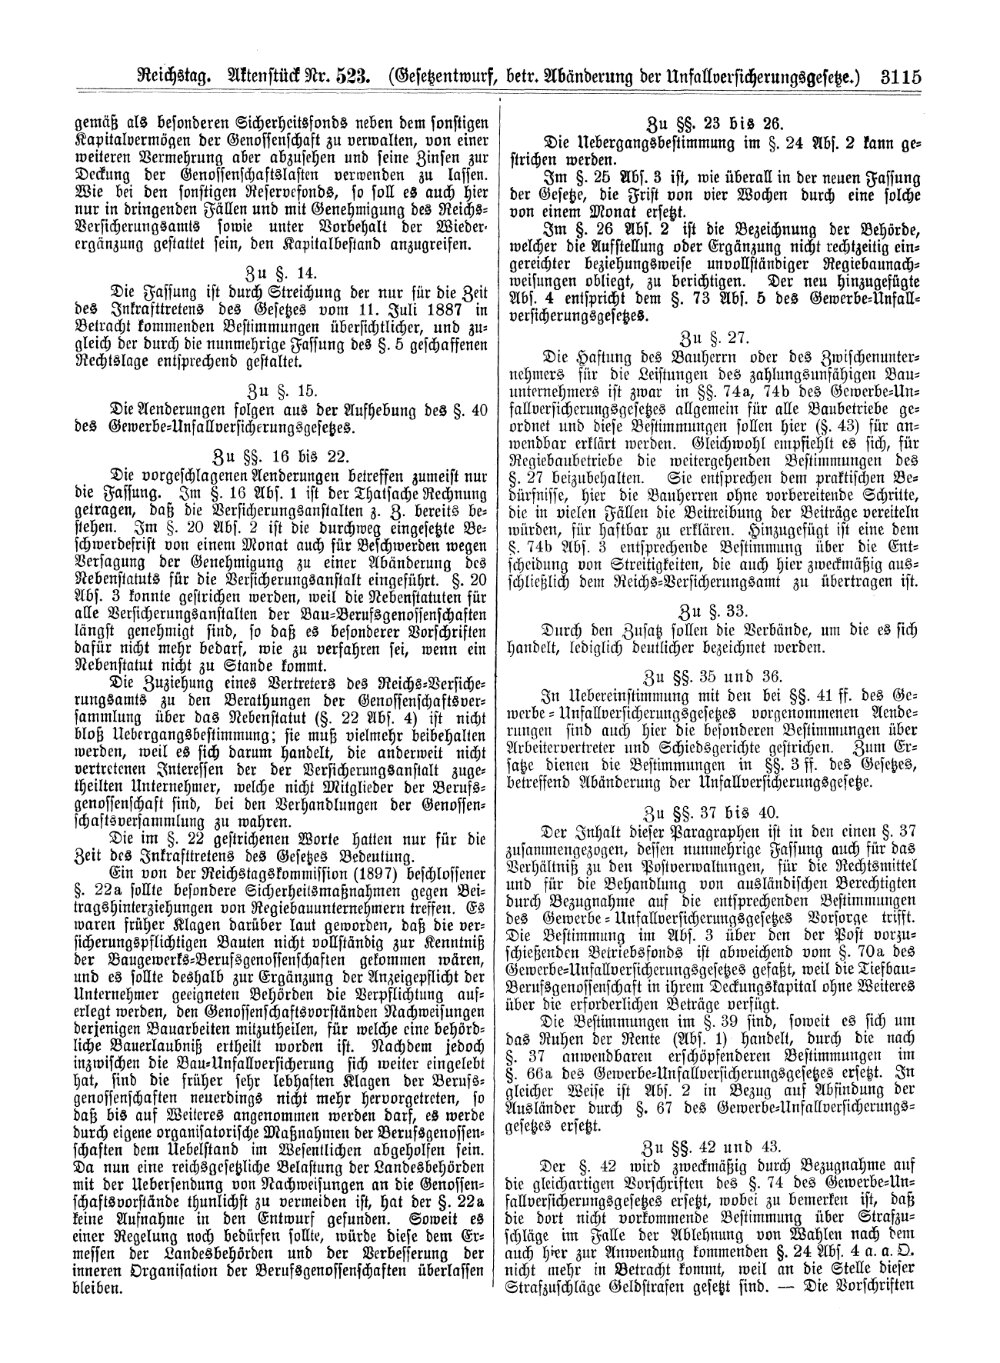 Scan of page 3115